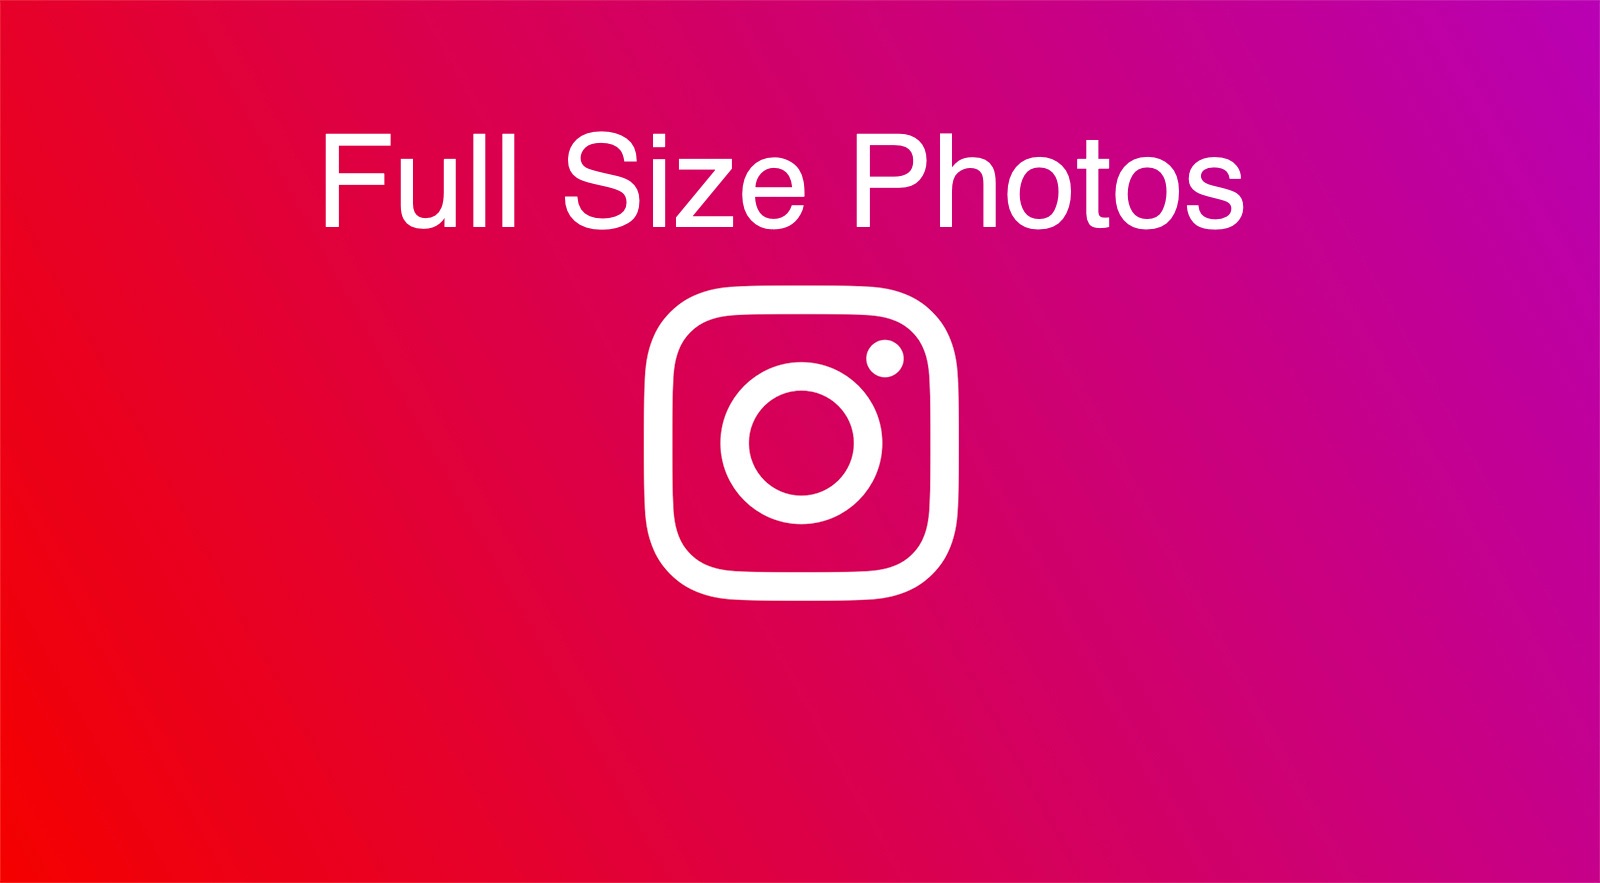 Instagram Full Size: How to Make Your Photos and Videos Bigger on Instagram